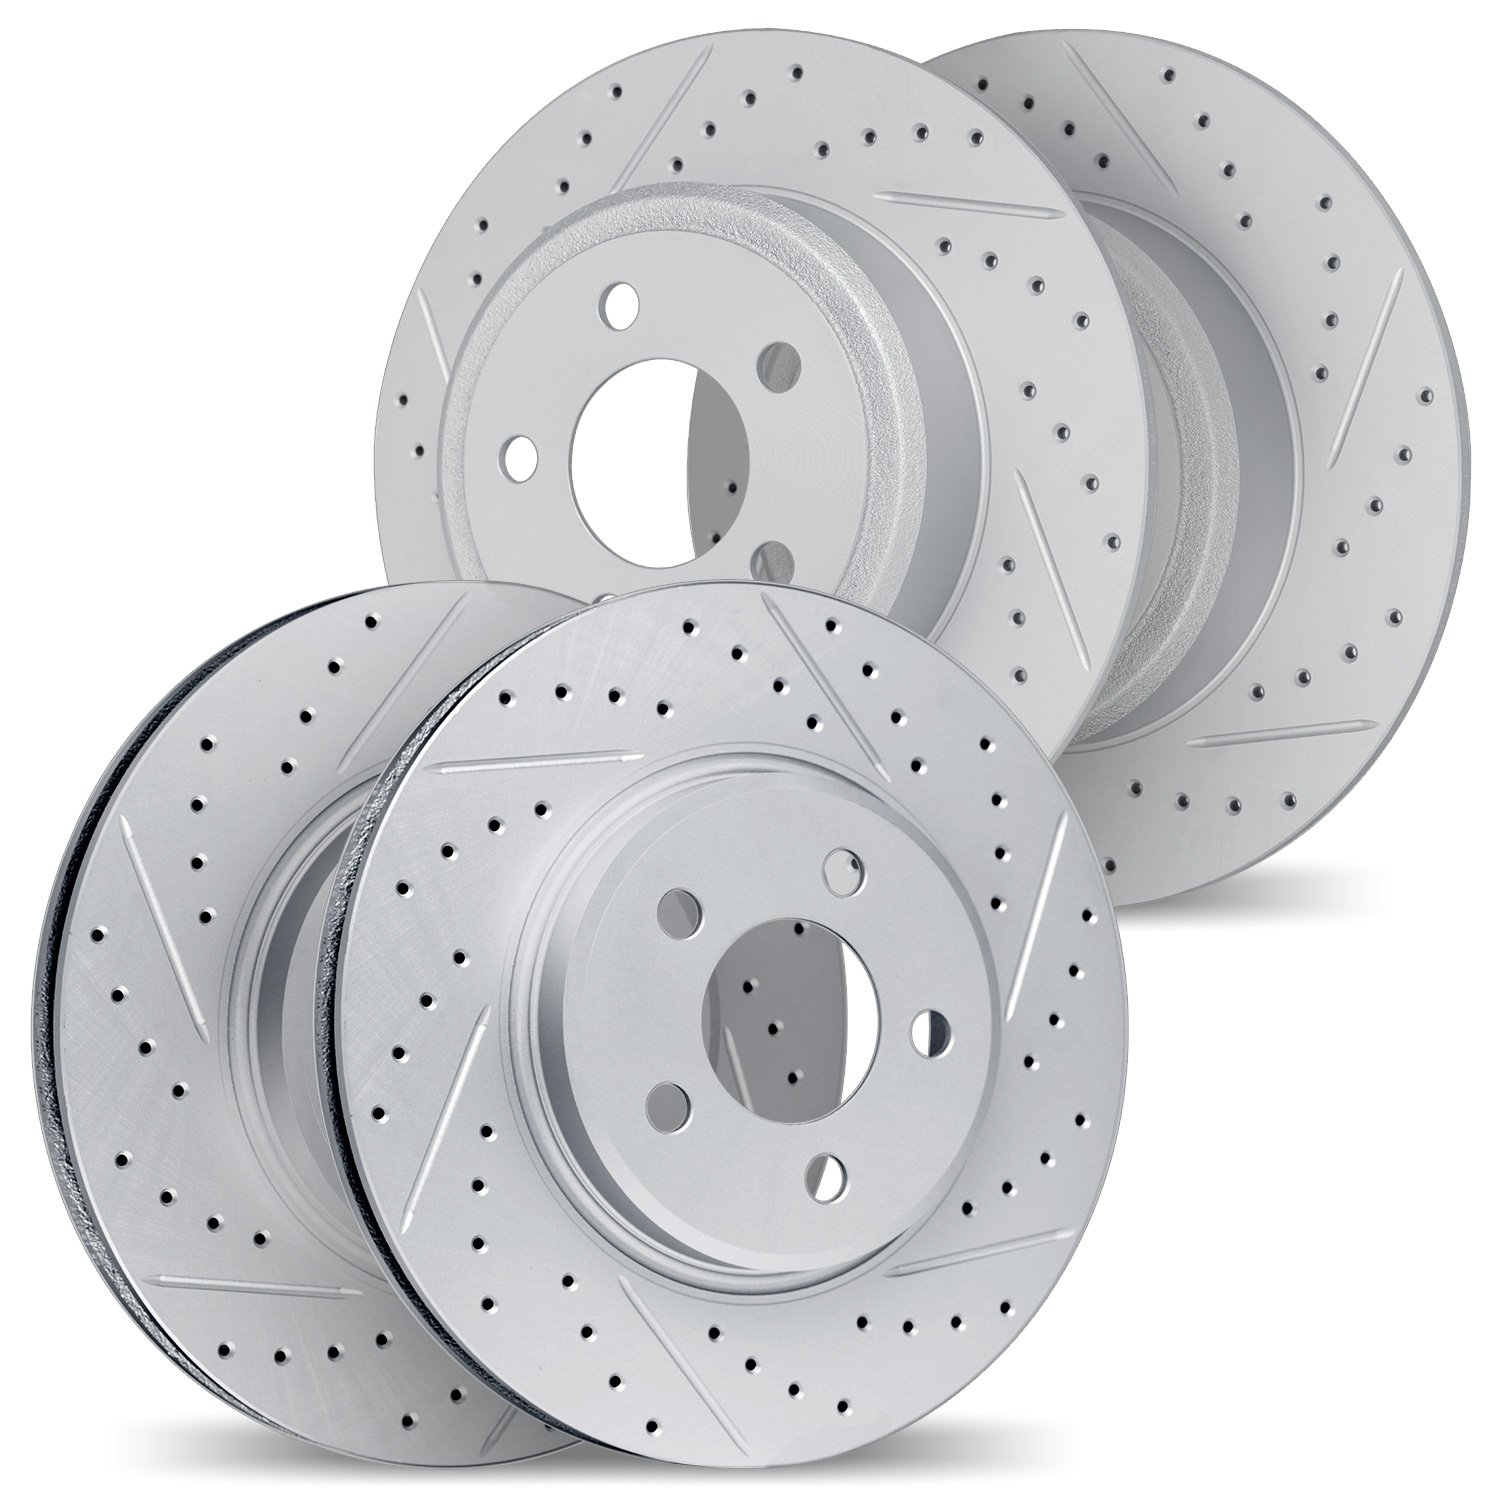 2004-42000 Geoperformance Drilled/Slotted Brake Rotors, Fits Select Mopar, Position: Front and Rear